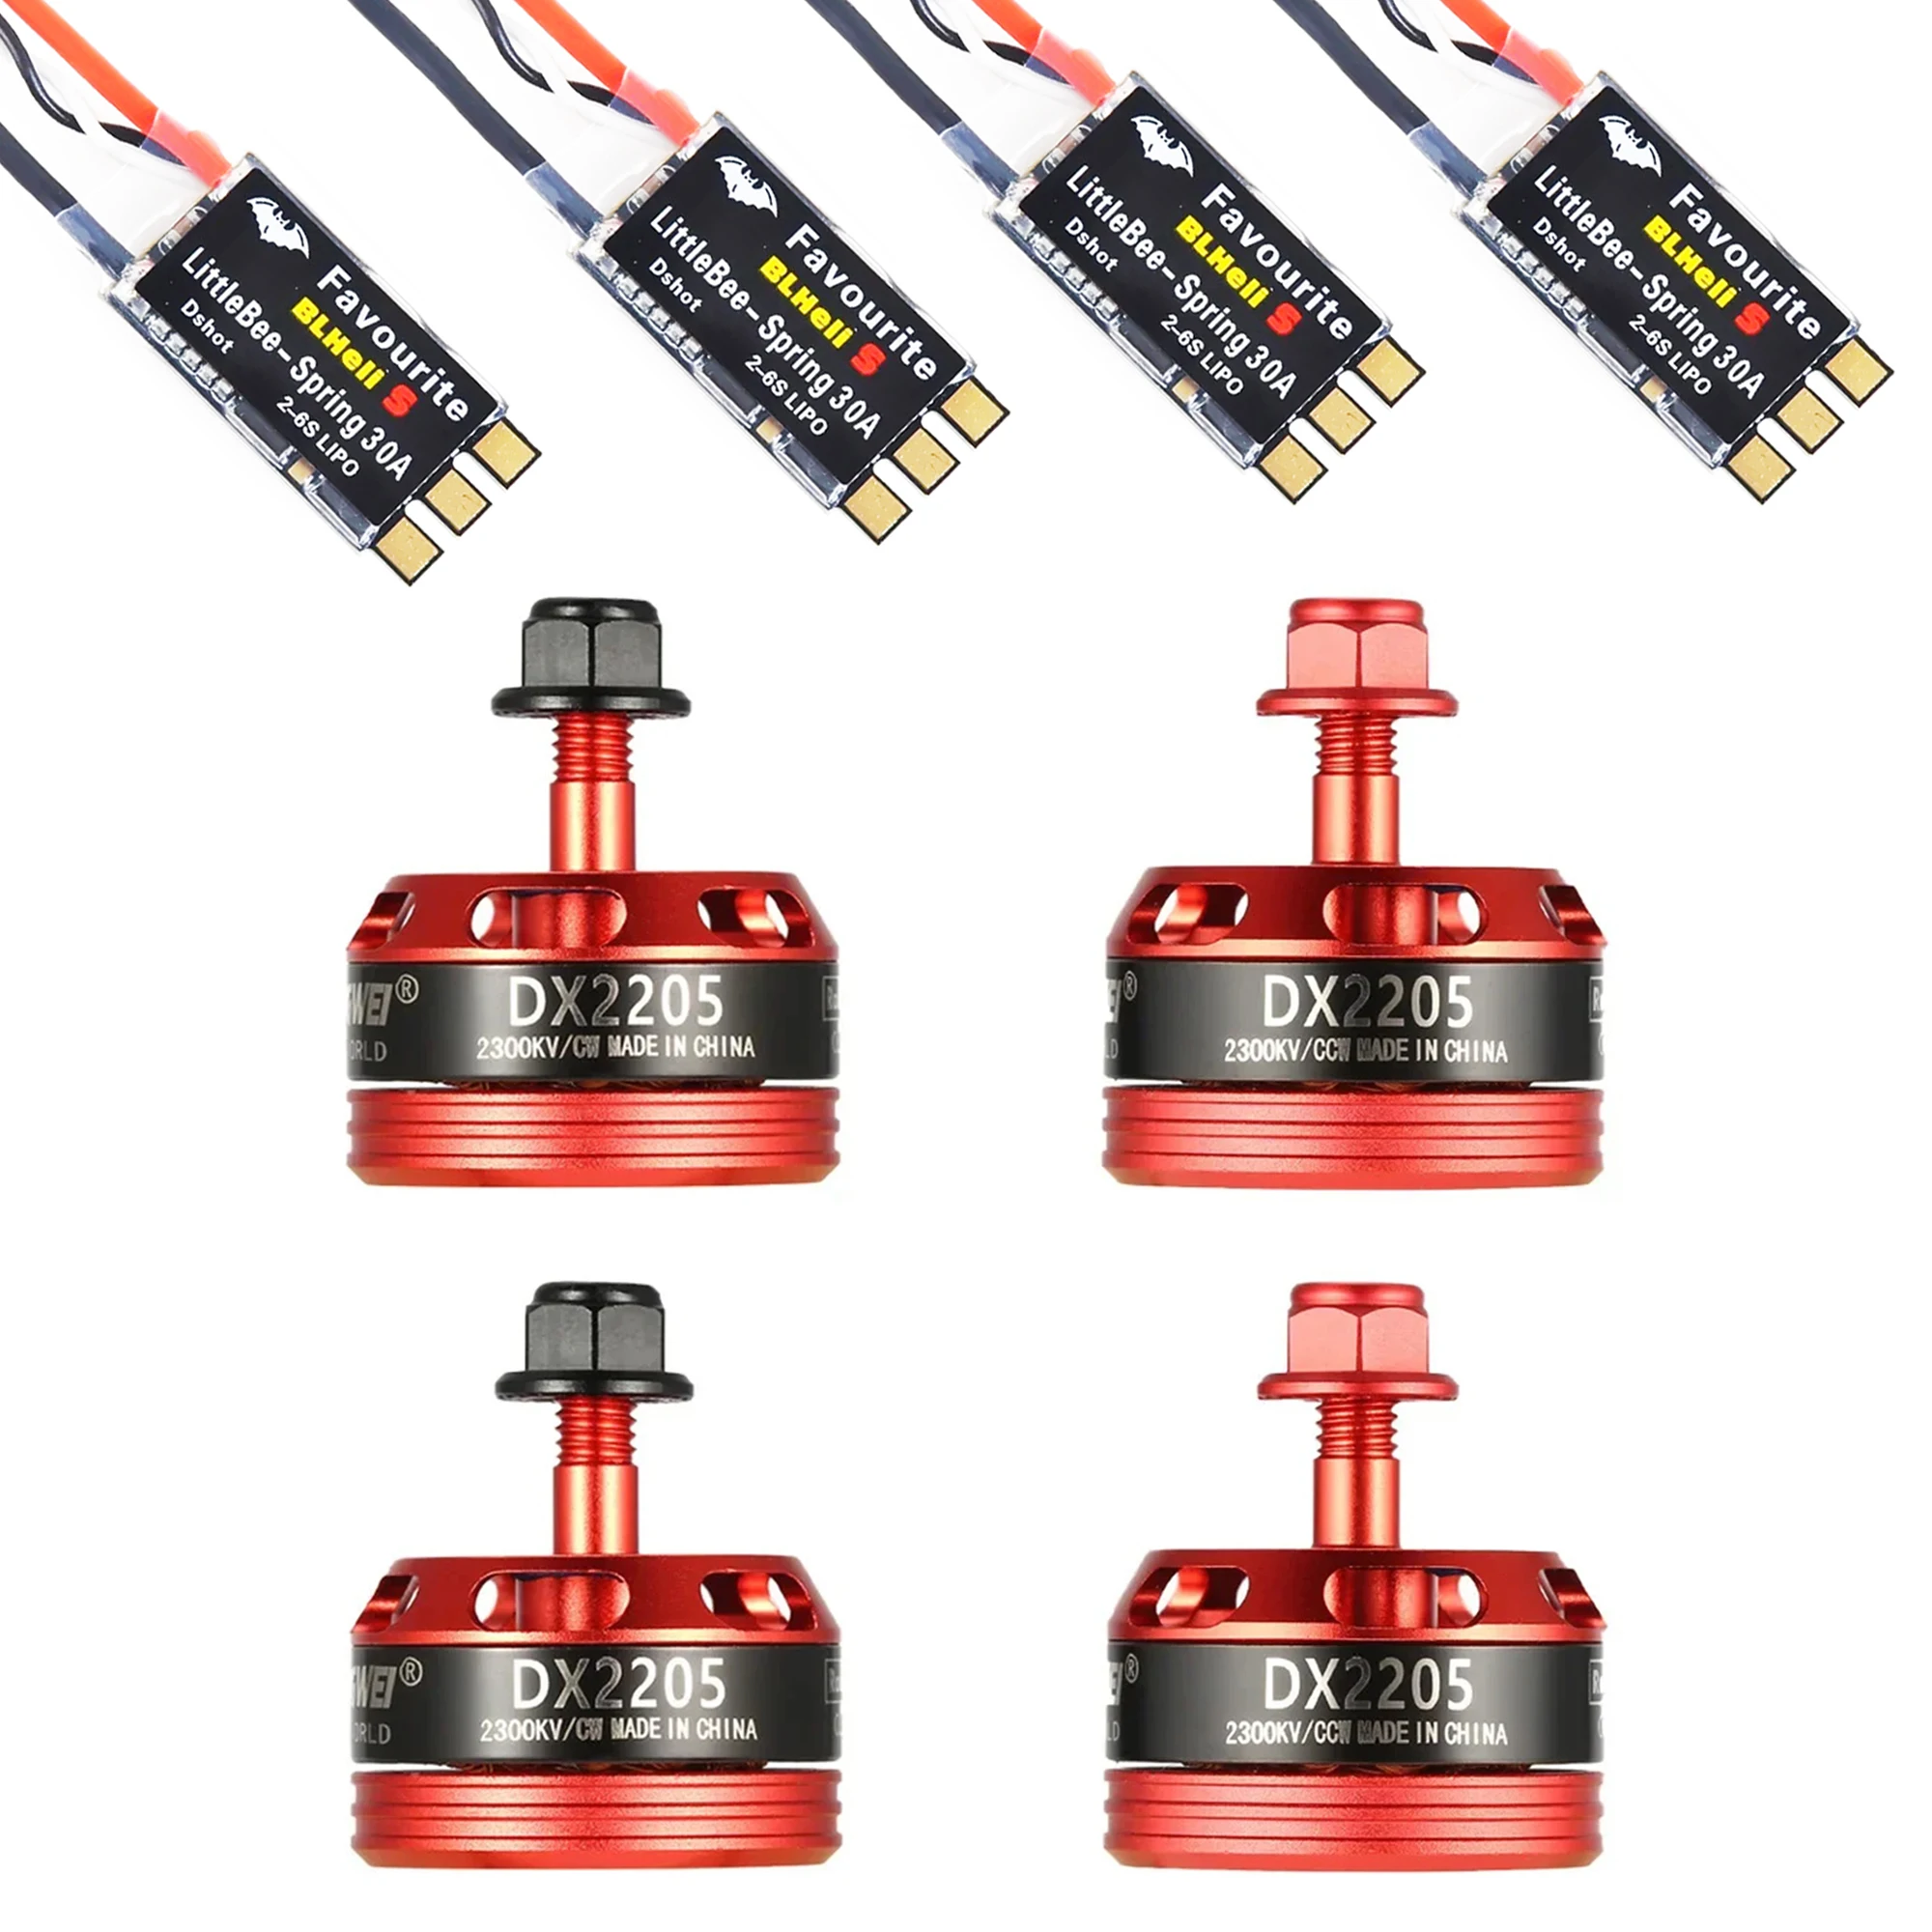 

RC 2205 2300KV CW CCW Brushless Motor 2-4S w/ 30A Favourite FVT ESC for FPV RC QAV250 X210 Racing Drone Quadcopter Multicopter